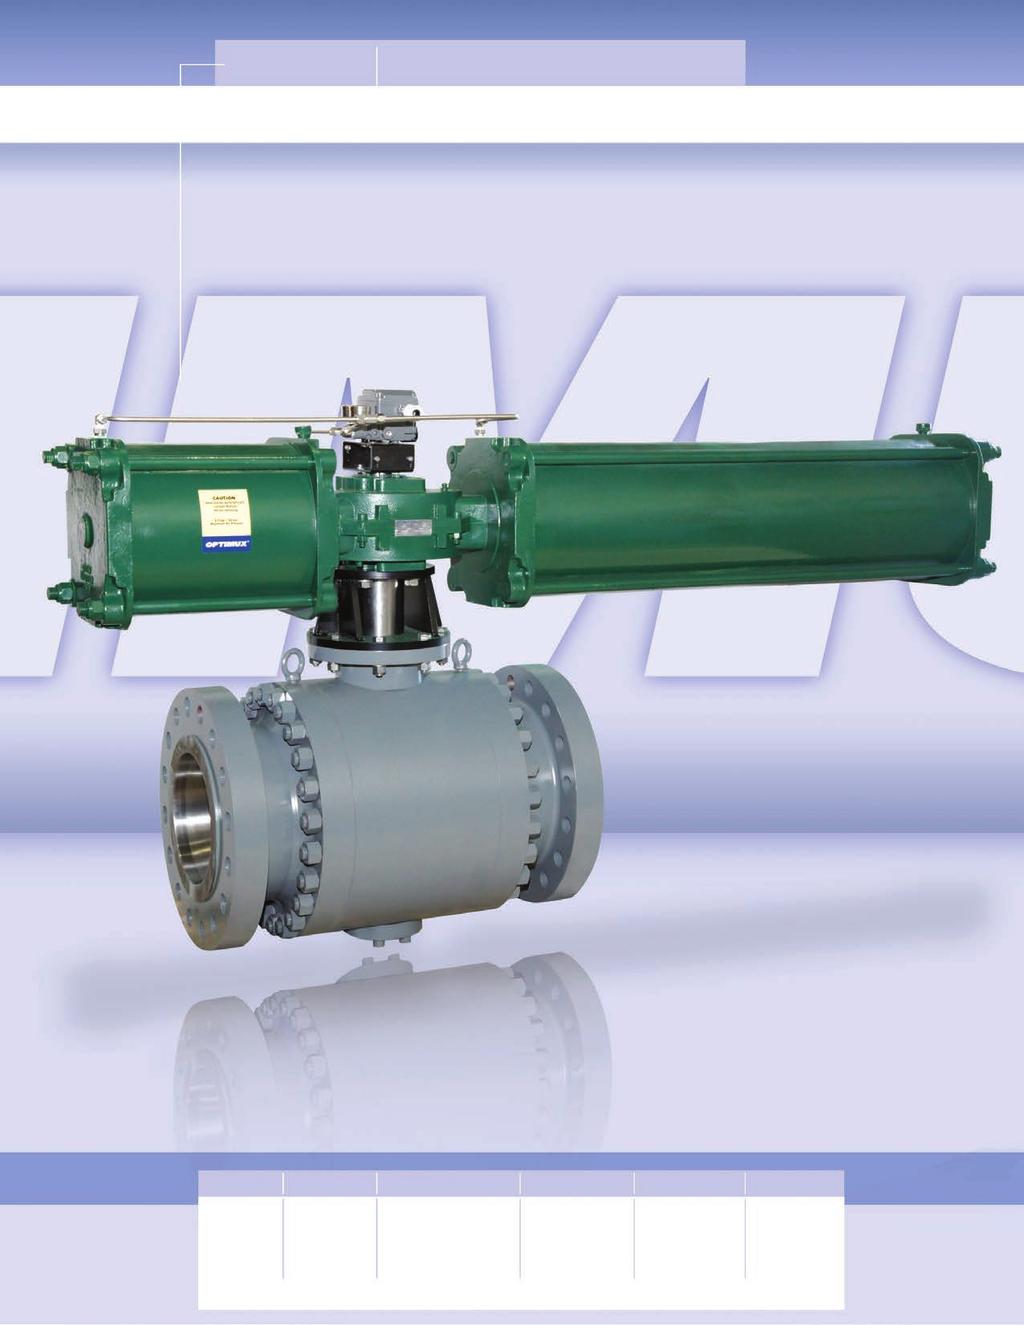 OpTB TM Trunnion Ball Valve Legendary robustness and reliability with added flexibility With its modified characterized ball, the Optimux OpTB TM delivers excellent rangeability and control for